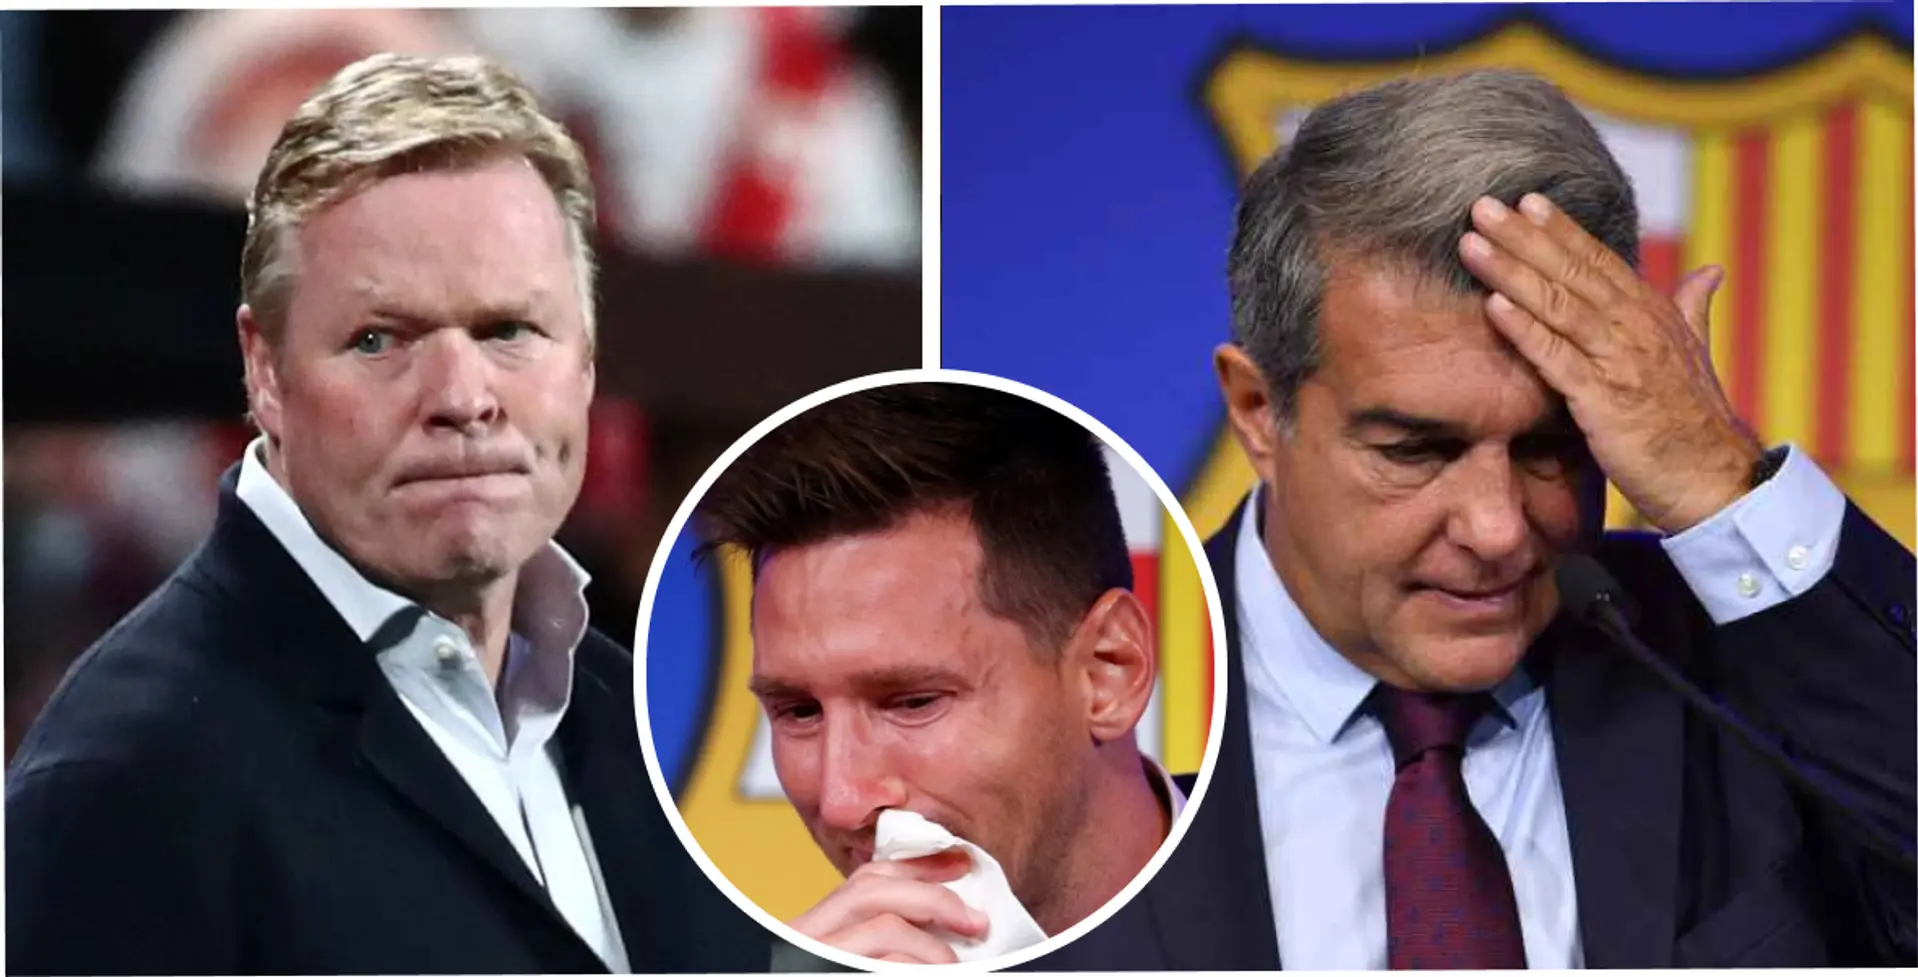 Koeman names reason for his flop at Barca, it has to do with transfers